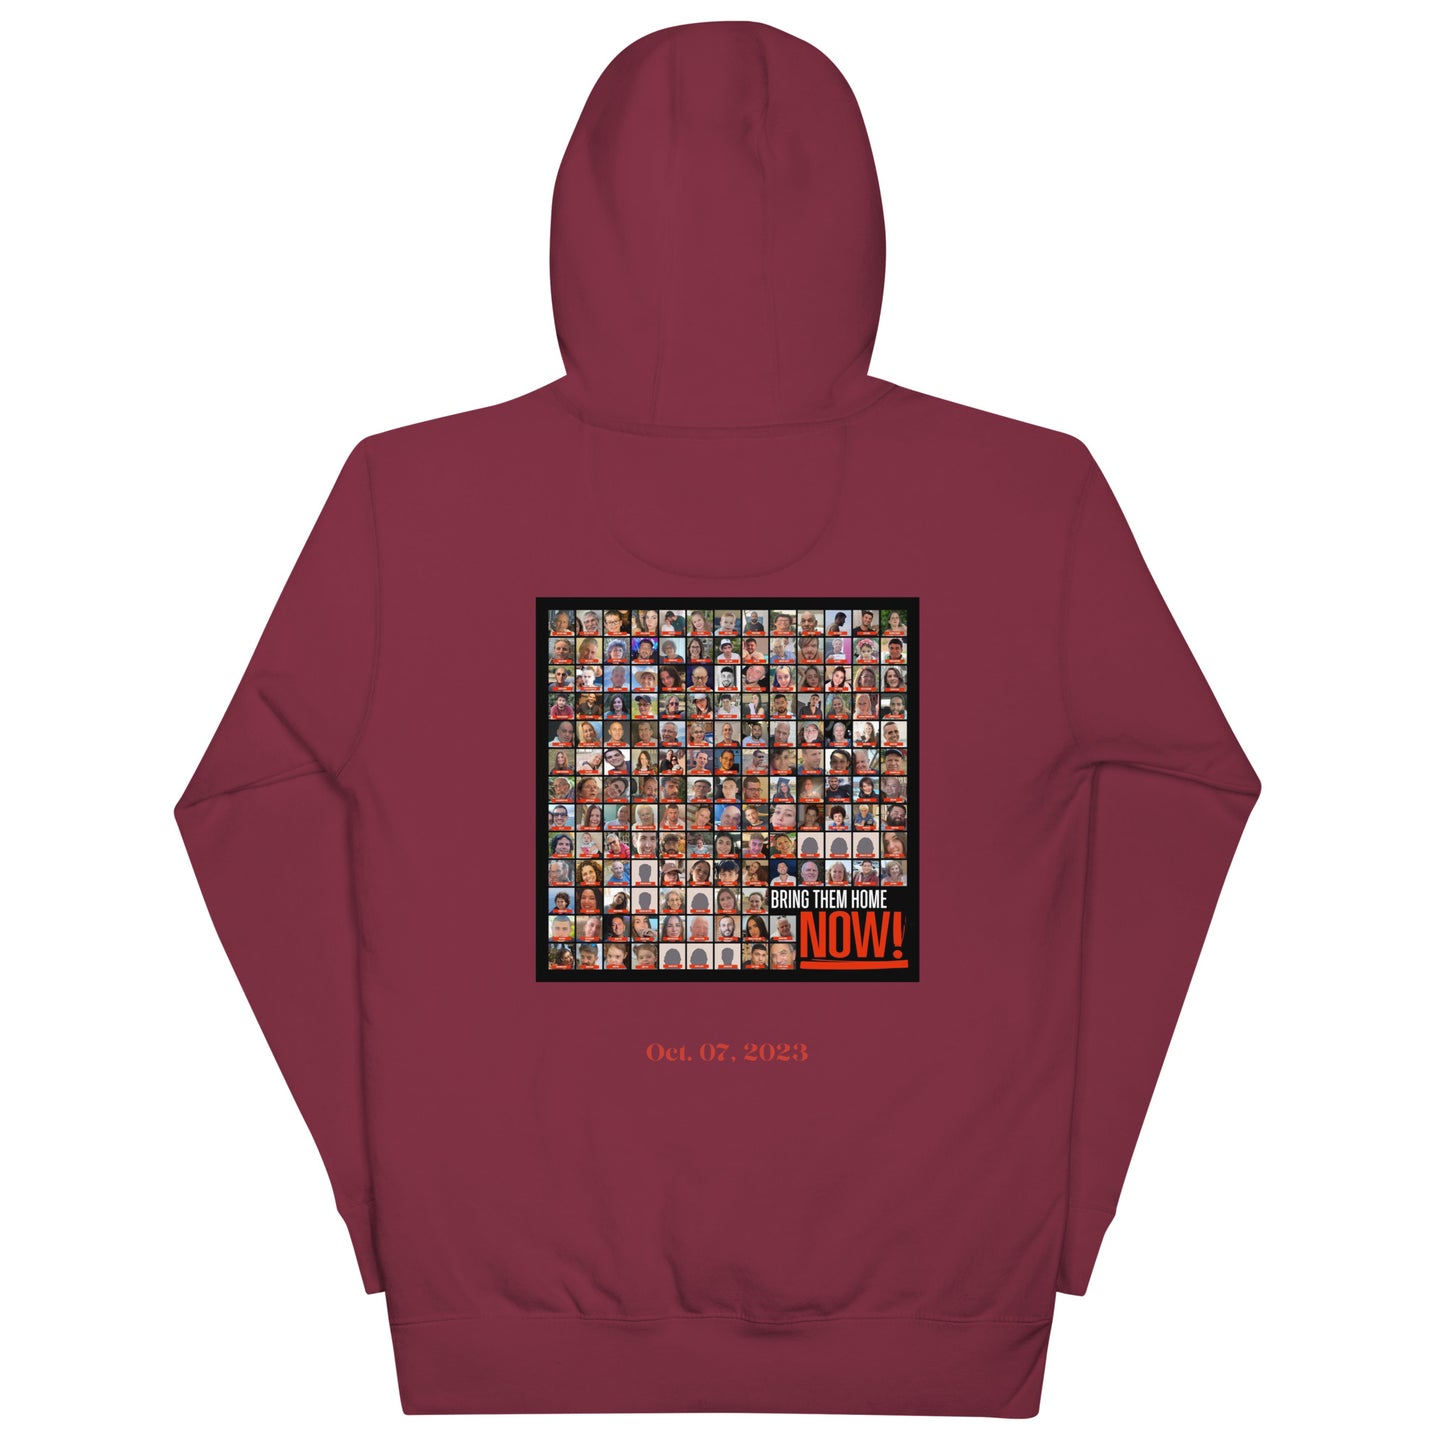 #BringThemHome #1 - Unisex Hoodie (6 colors)